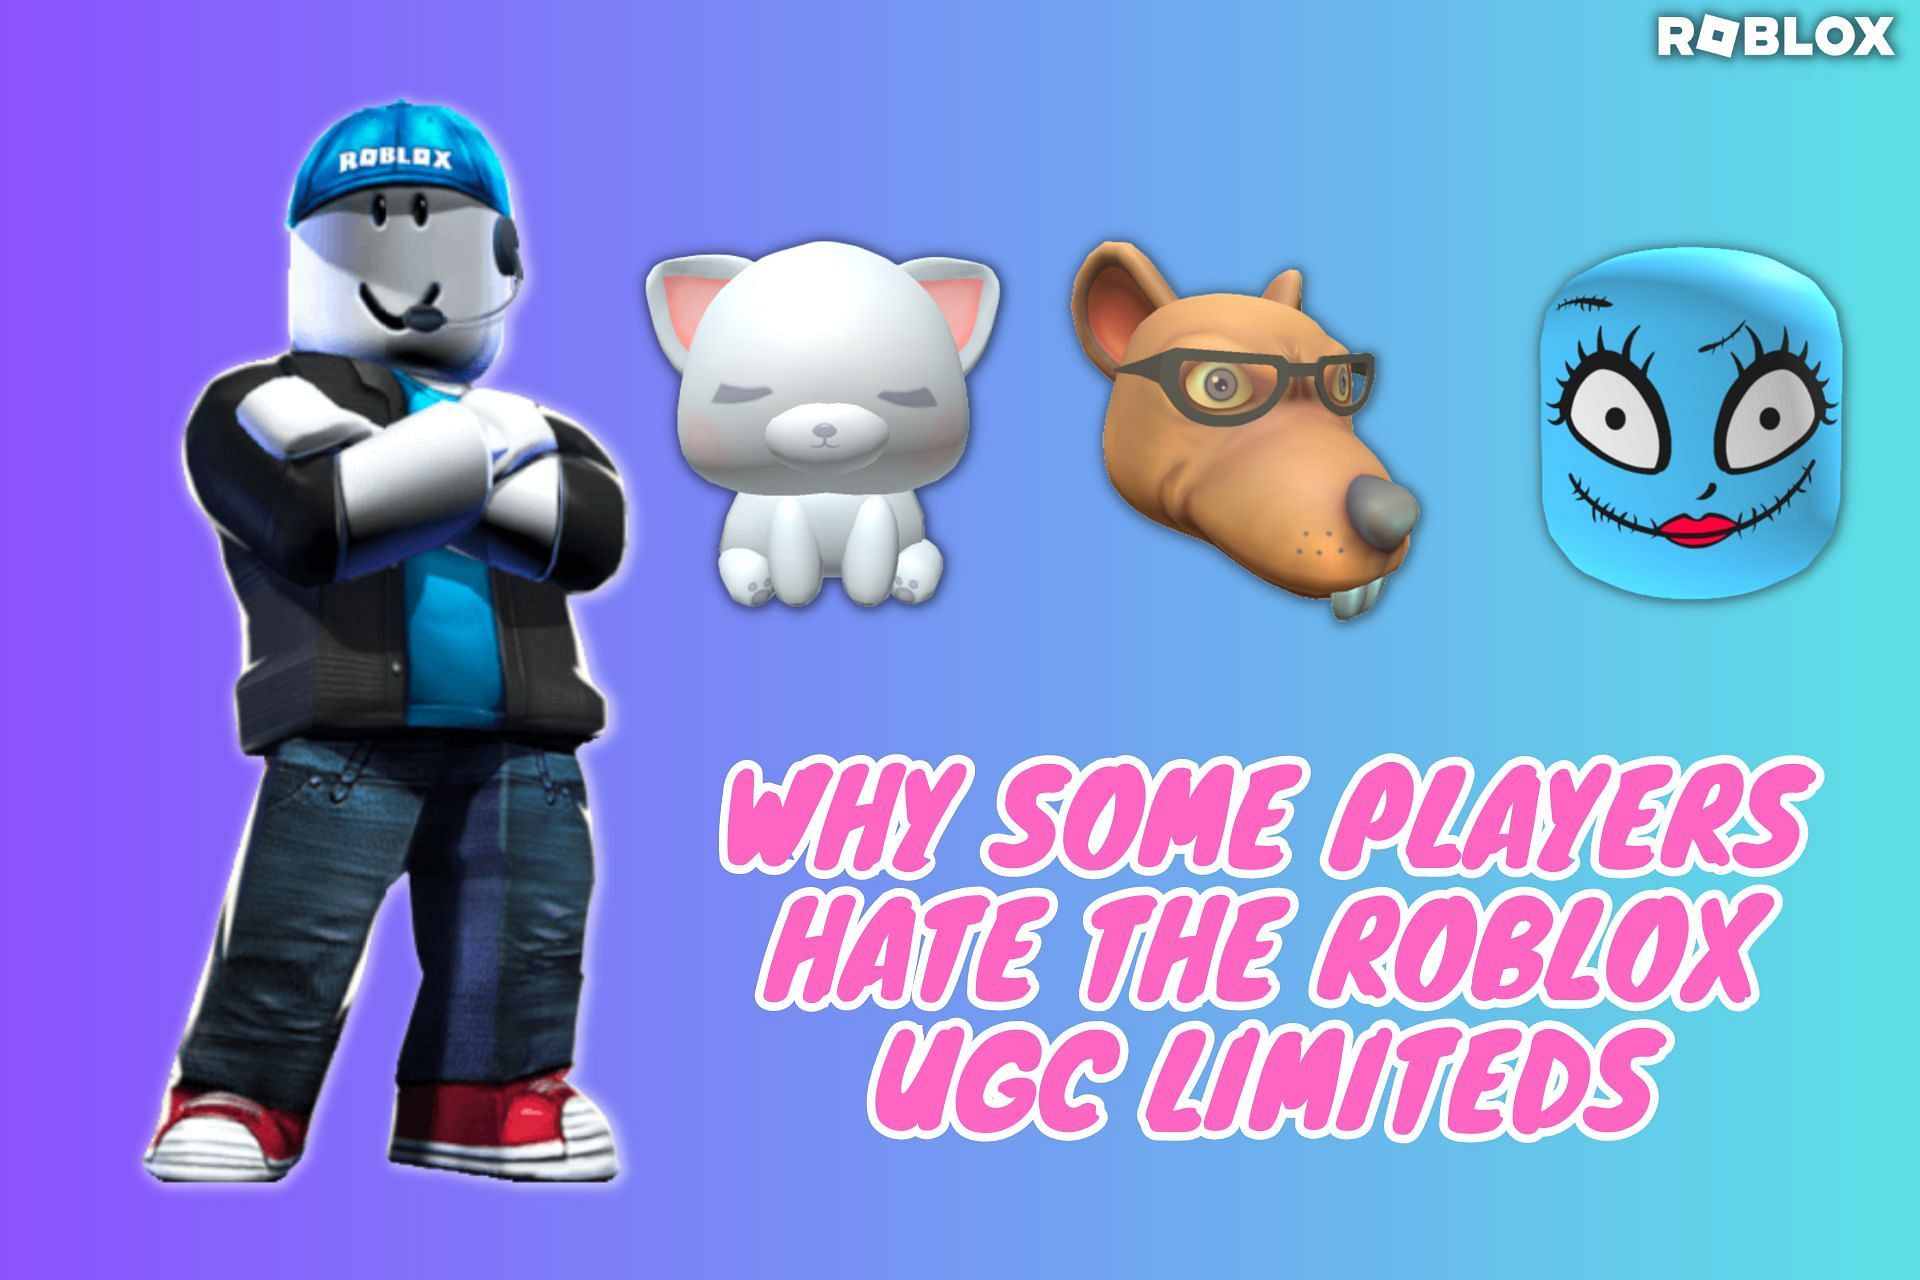 Learn why the UGC limiteds are getting all the hate (Image via Sportskeeda)